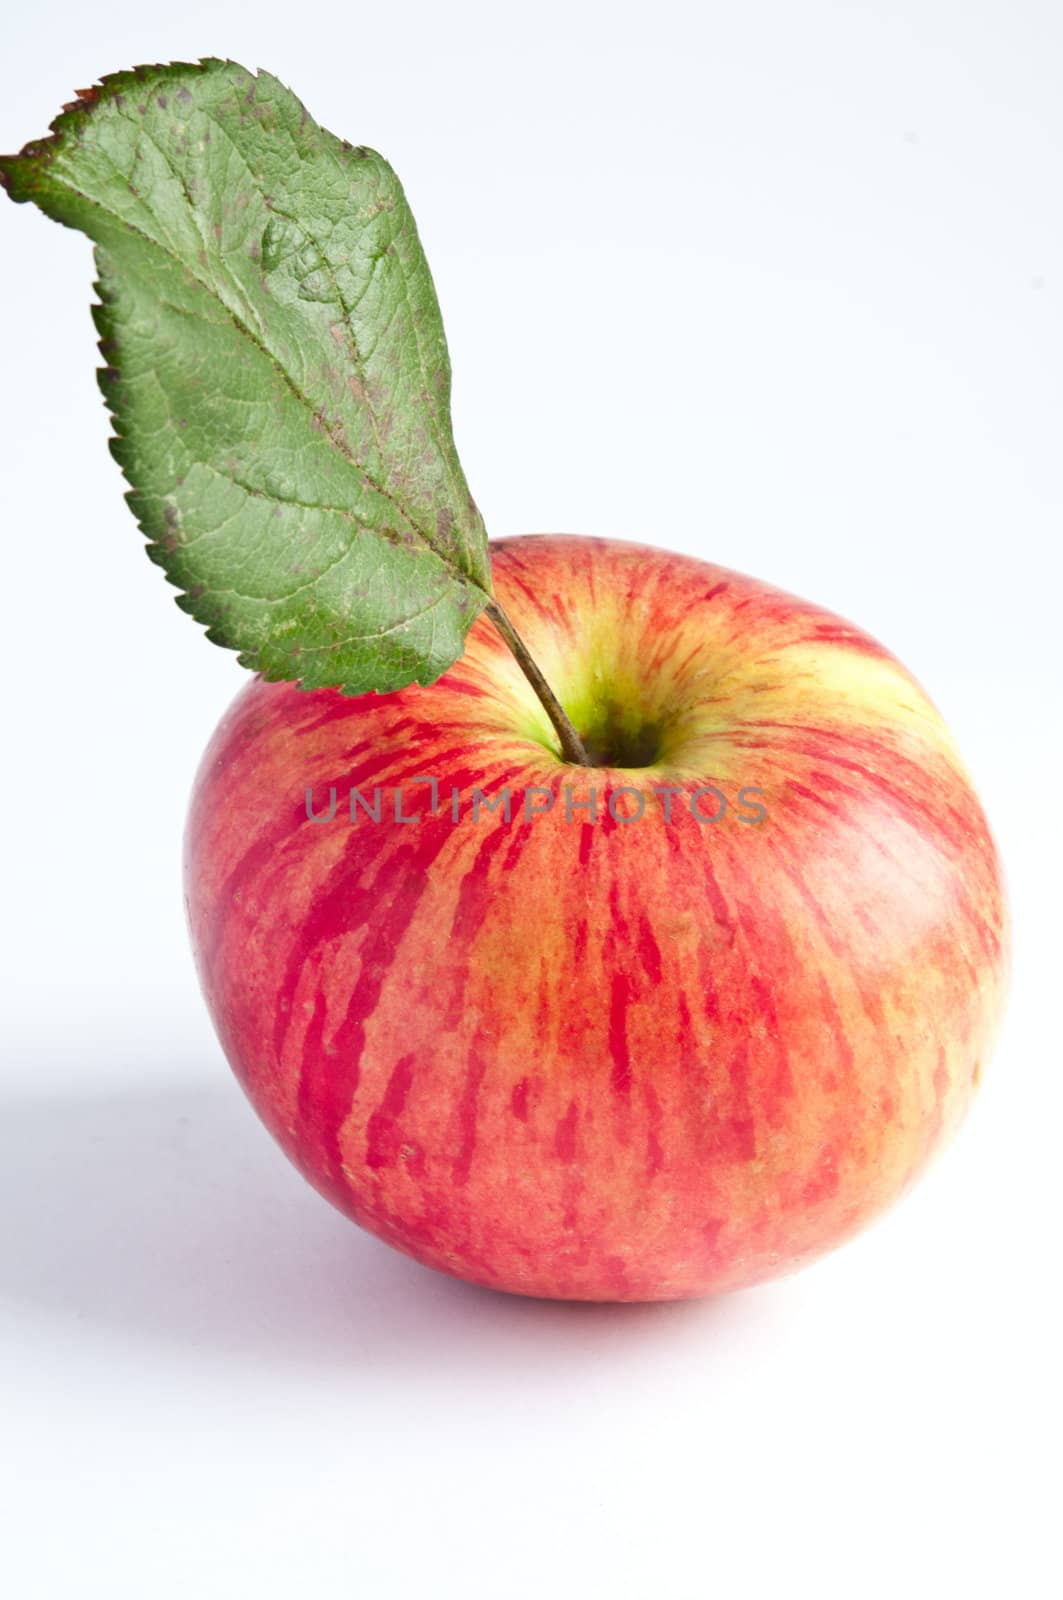   Red apple with green leaf photographed against a white background